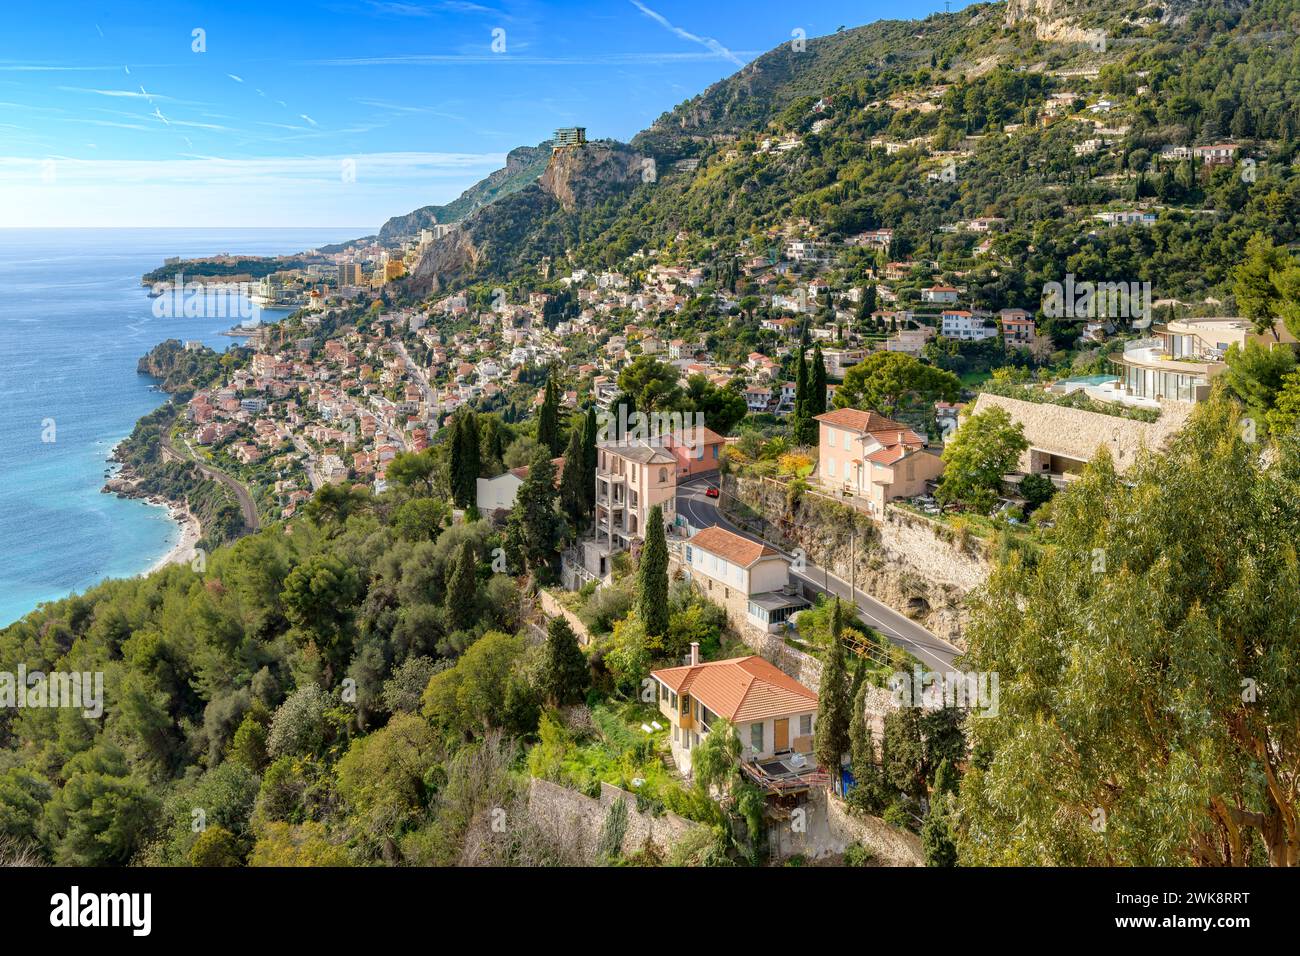 Looking down onto the rooftops of the pretty town of Roquebrune-cap-Martin. Clinging to the hillside on the French Riviera, Cote d'Azur, France. Stock Photo